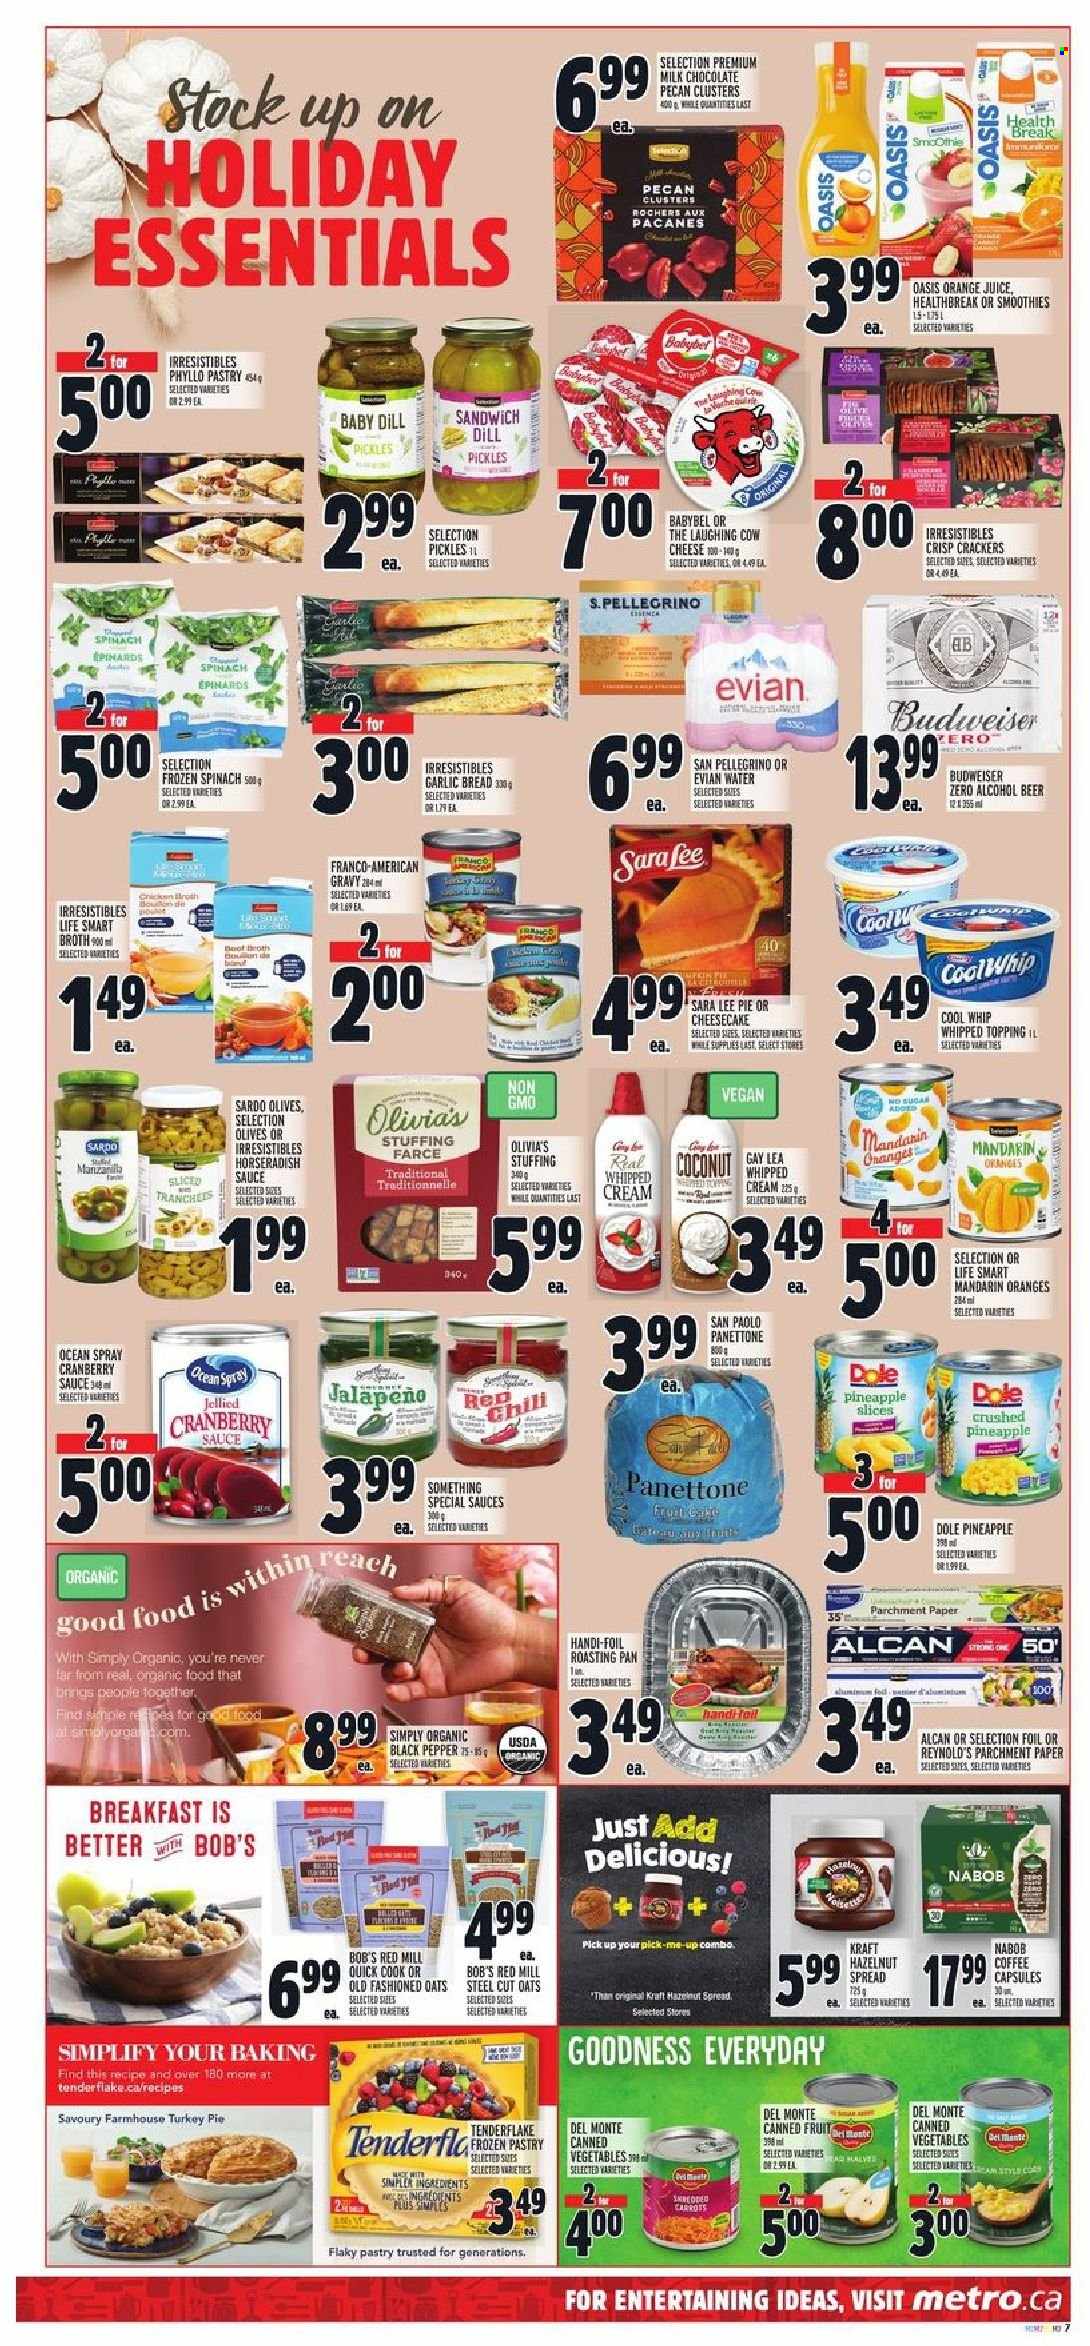 thumbnail - Metro Flyer - September 30, 2021 - October 06, 2021 - Sales products - cake, Sara Lee, panettone, cheesecake, horseradish, Dole, jalapeño, mandarines, pineapple, coconut, Kraft®, cheese, The Laughing Cow, Babybel, Cool Whip, whipped cream, milk chocolate, chocolate, crackers, topping, broth, pickles, canned vegetables, canned fruit, dill, black pepper, cranberry sauce, hazelnut spread, orange juice, juice, Evian, San Pellegrino, coffee, coffee capsules, alcohol, beer, pan, paper, Budweiser, olives. Page 9.